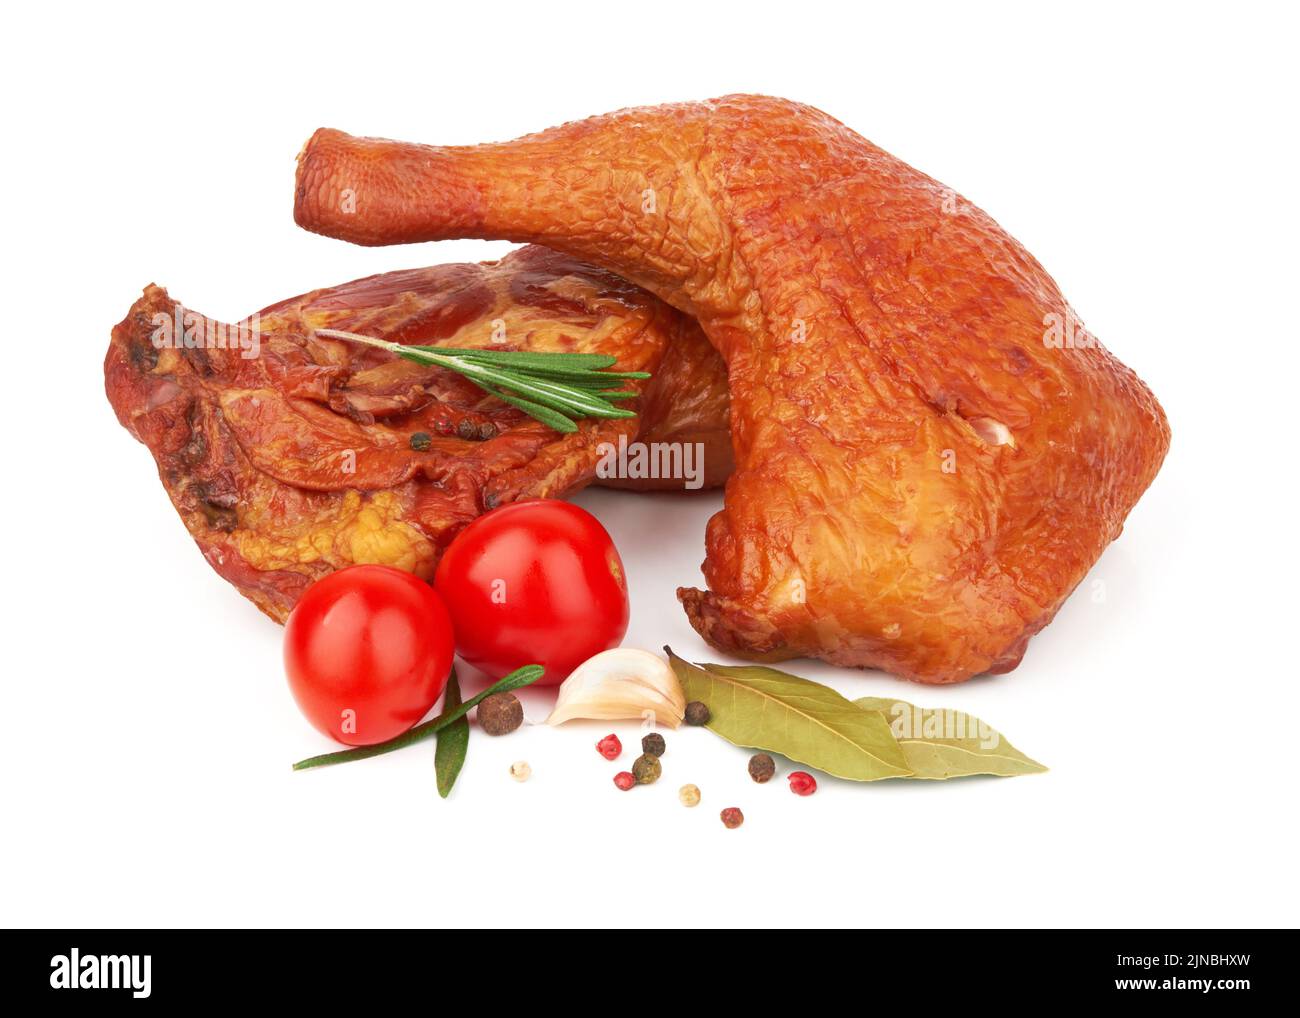 Baked chicken thighs with skin on Cut Out Stock Images & Pictures - Alamy